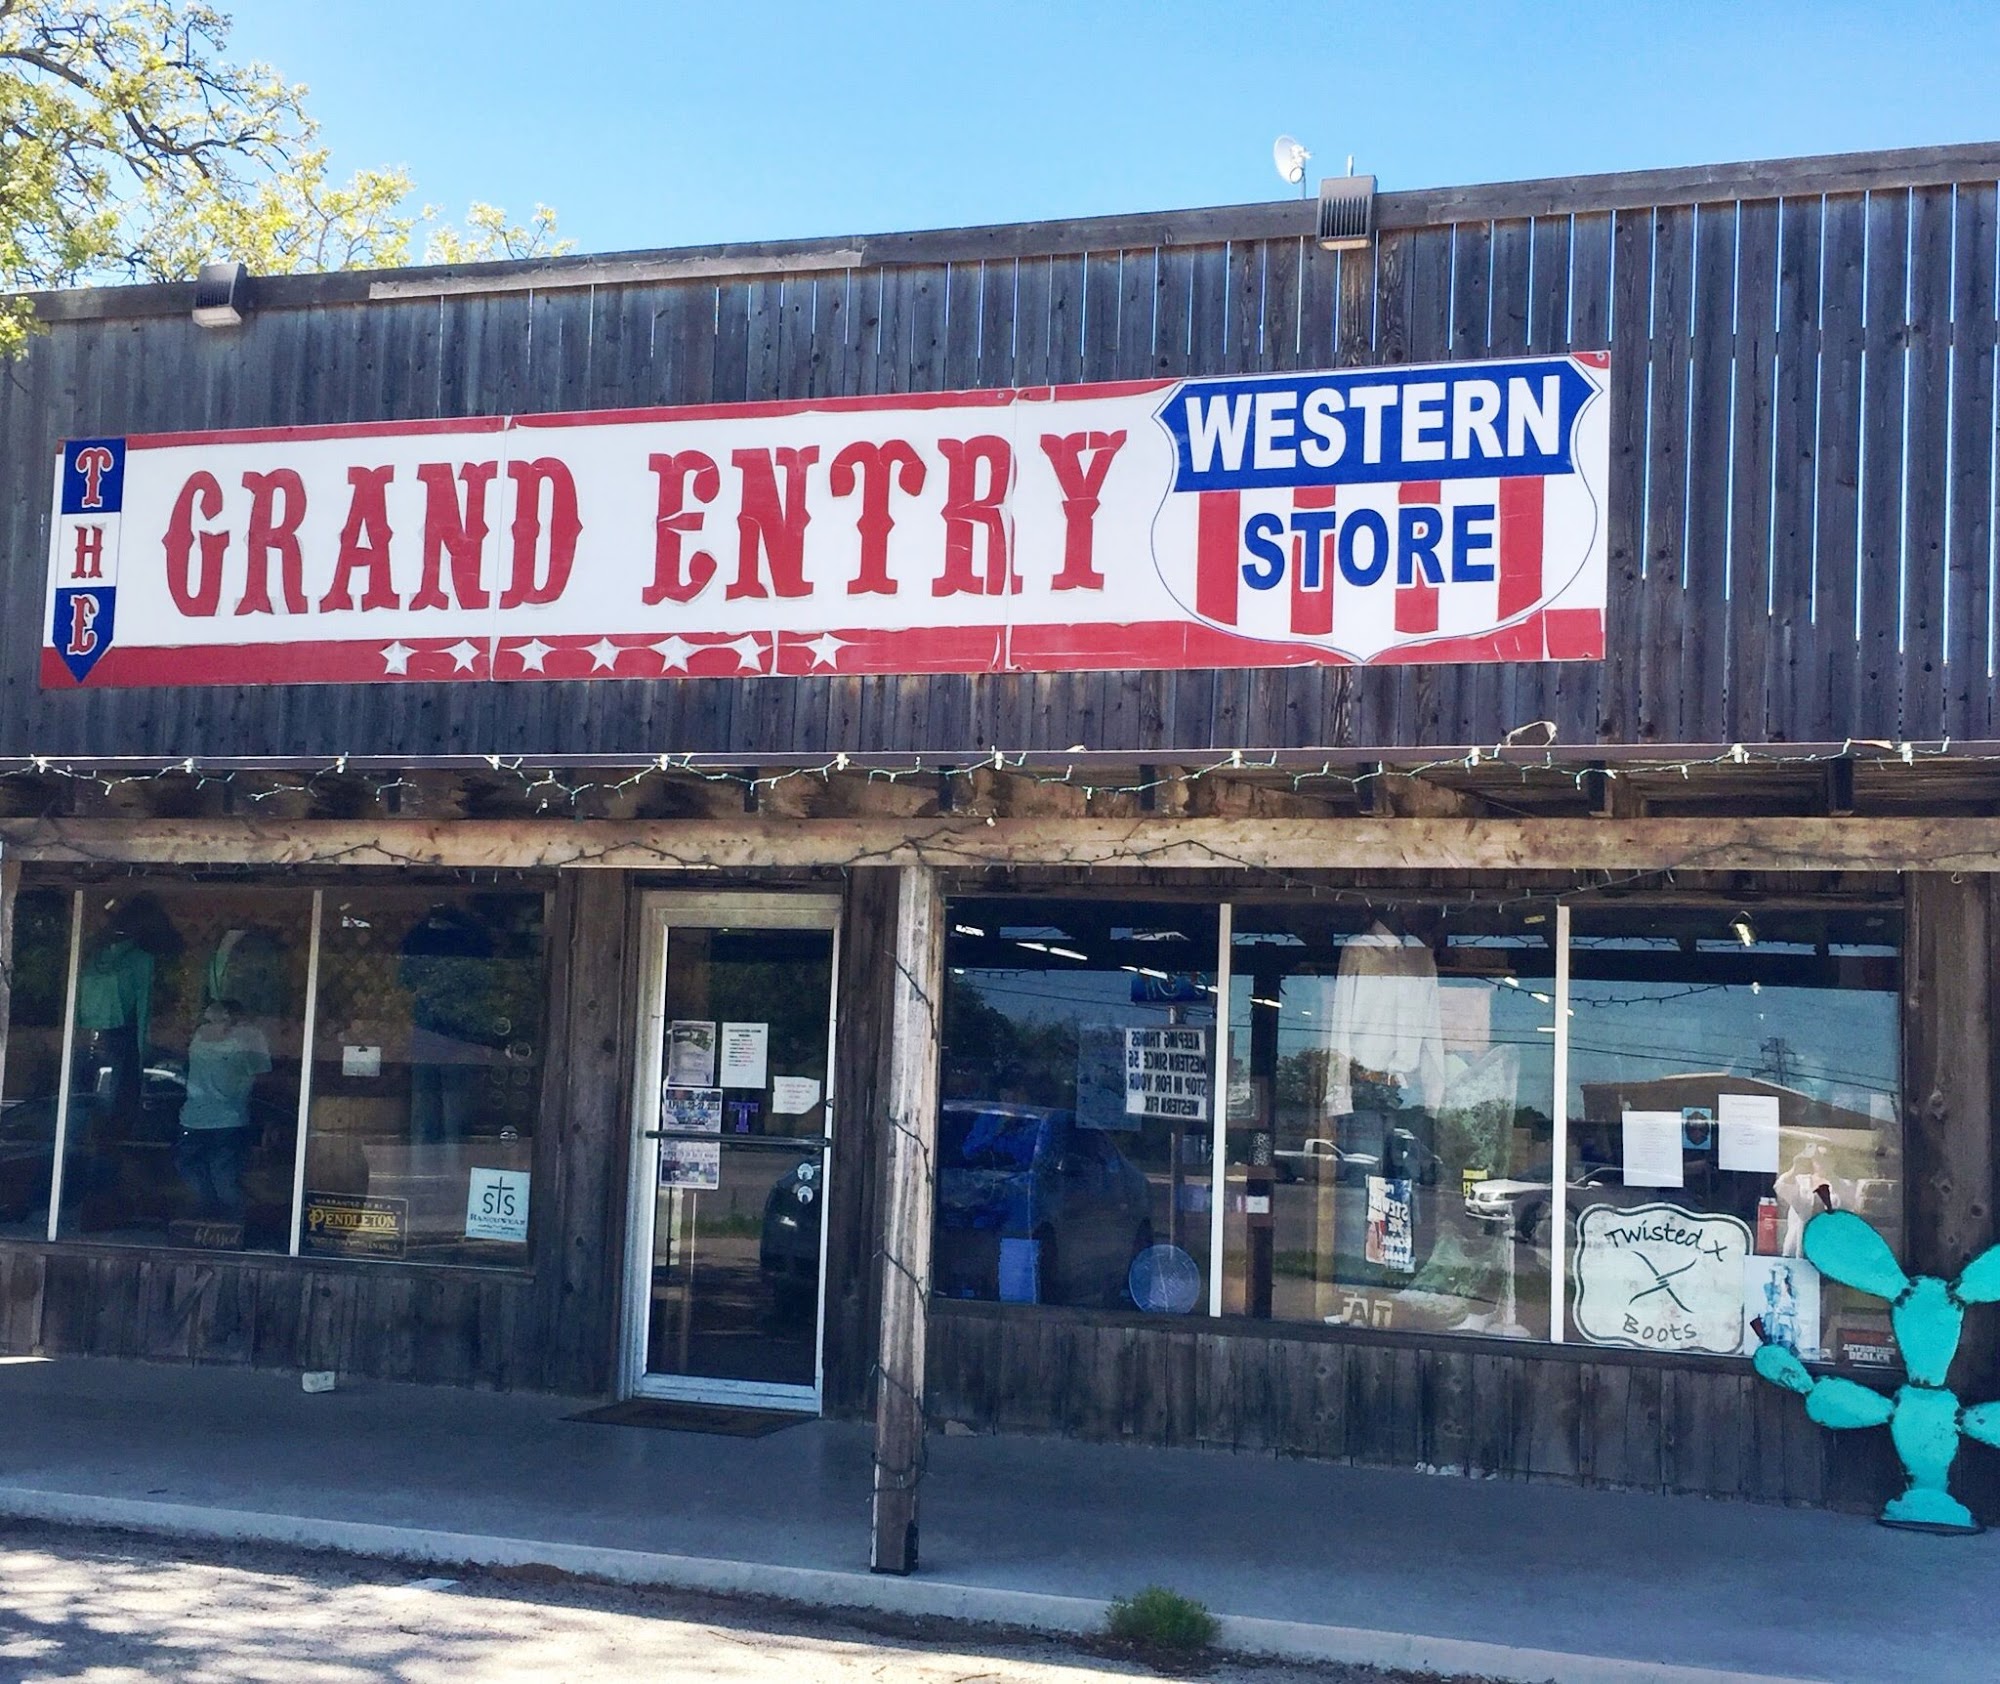 Chick Elms Grand Entry Western Store & Chick Elms Rodeo Shop